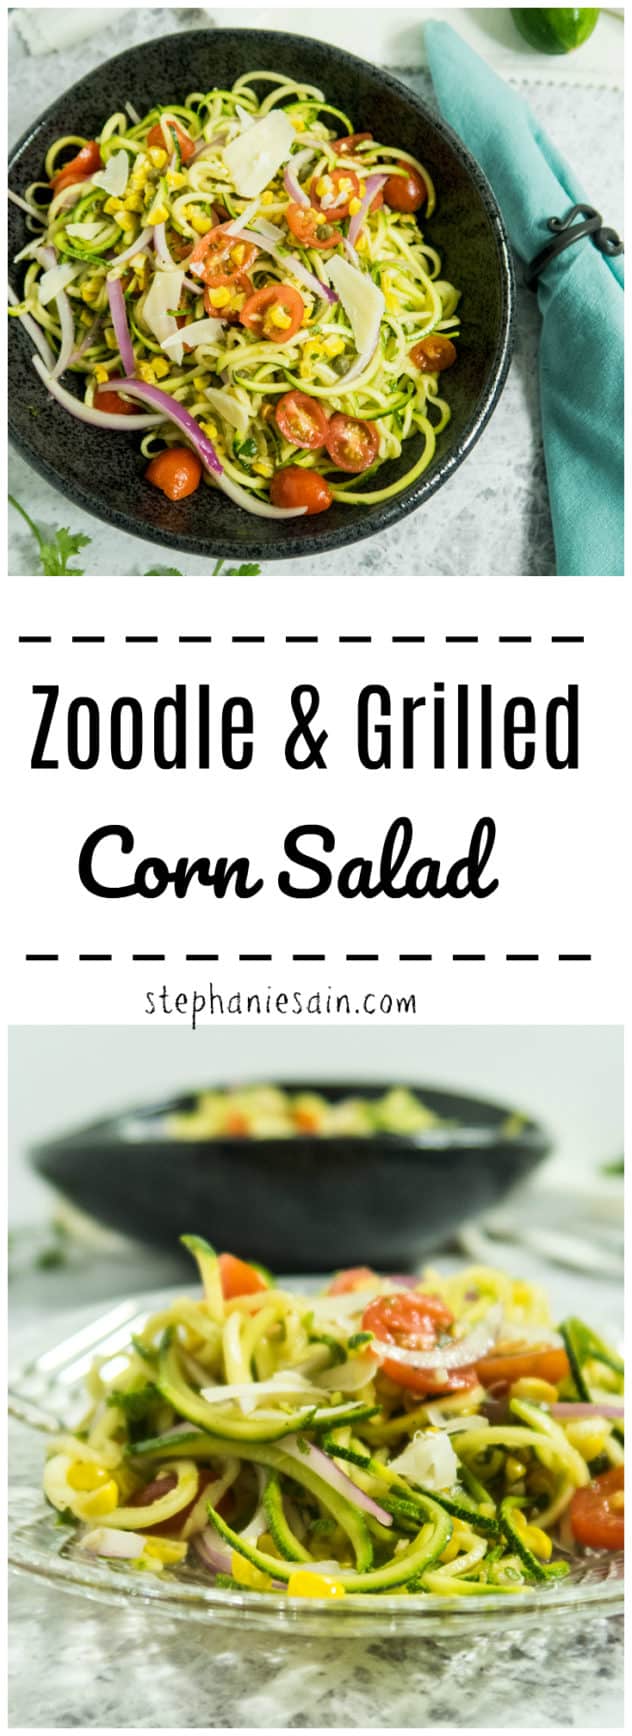 Zoodle & Grilled Corn Salad is perfect summer salad. Zucchini noodles topped with grilled corn and dressed with a cilantro lime dressing. Vegan option and Gluten Free.